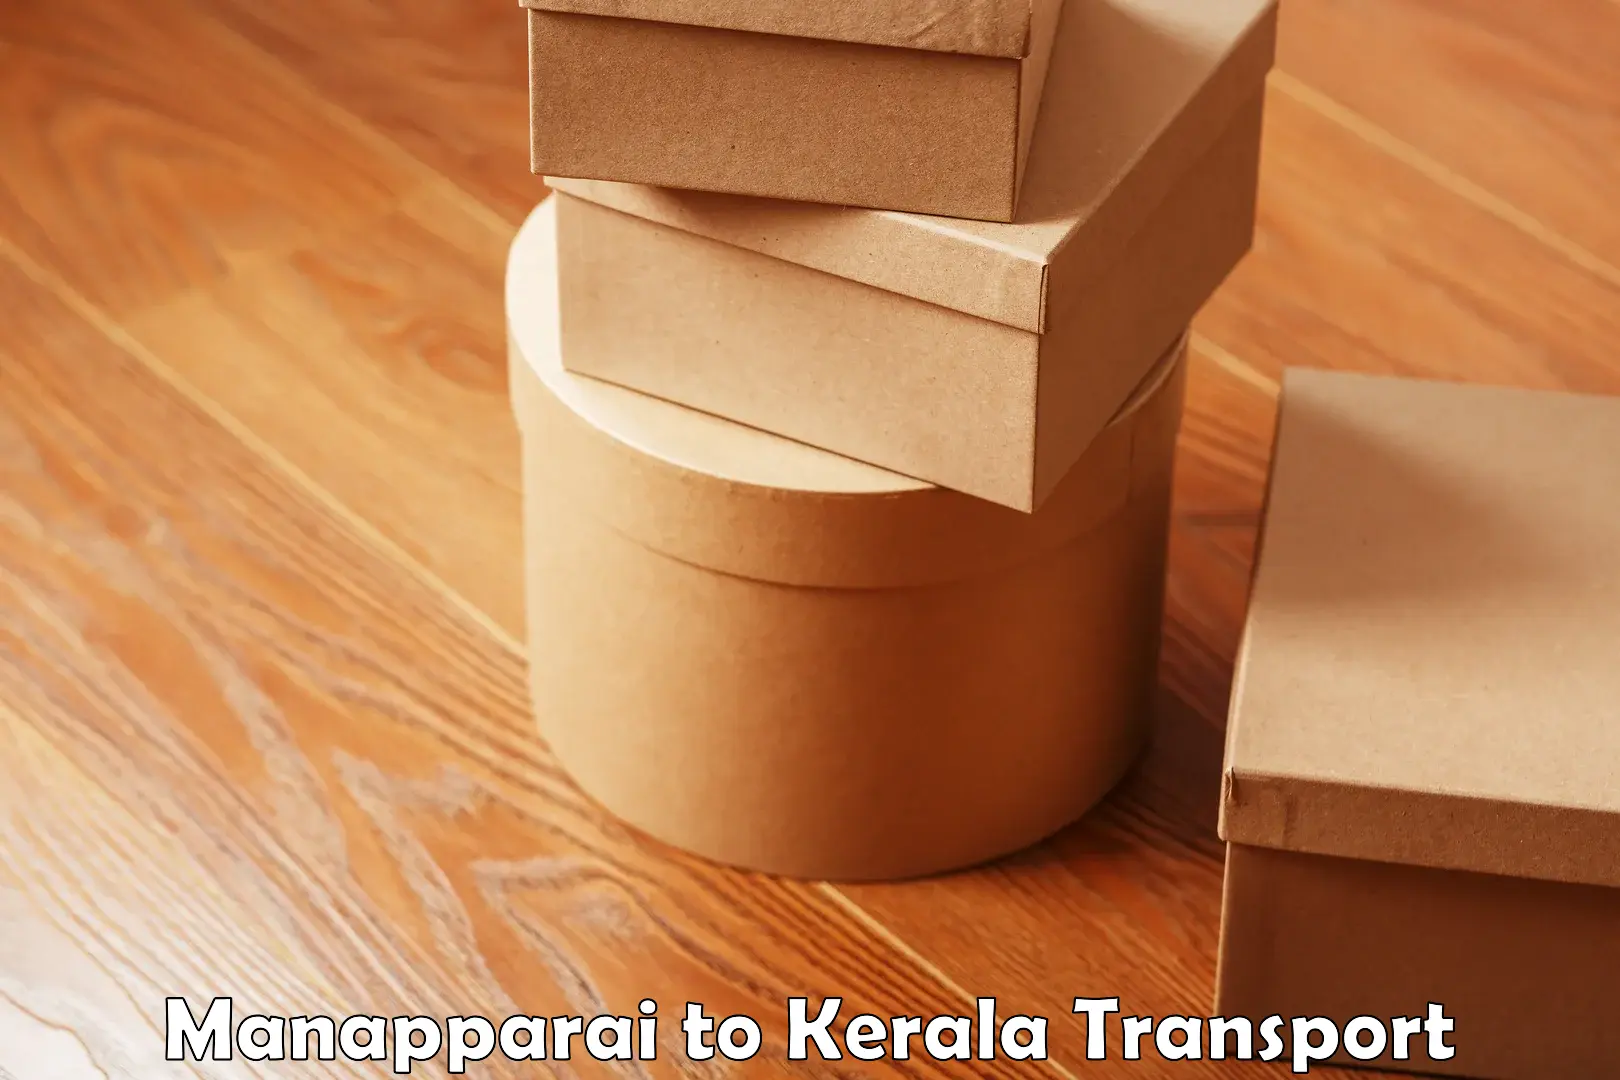 Road transport online services Manapparai to Kerala